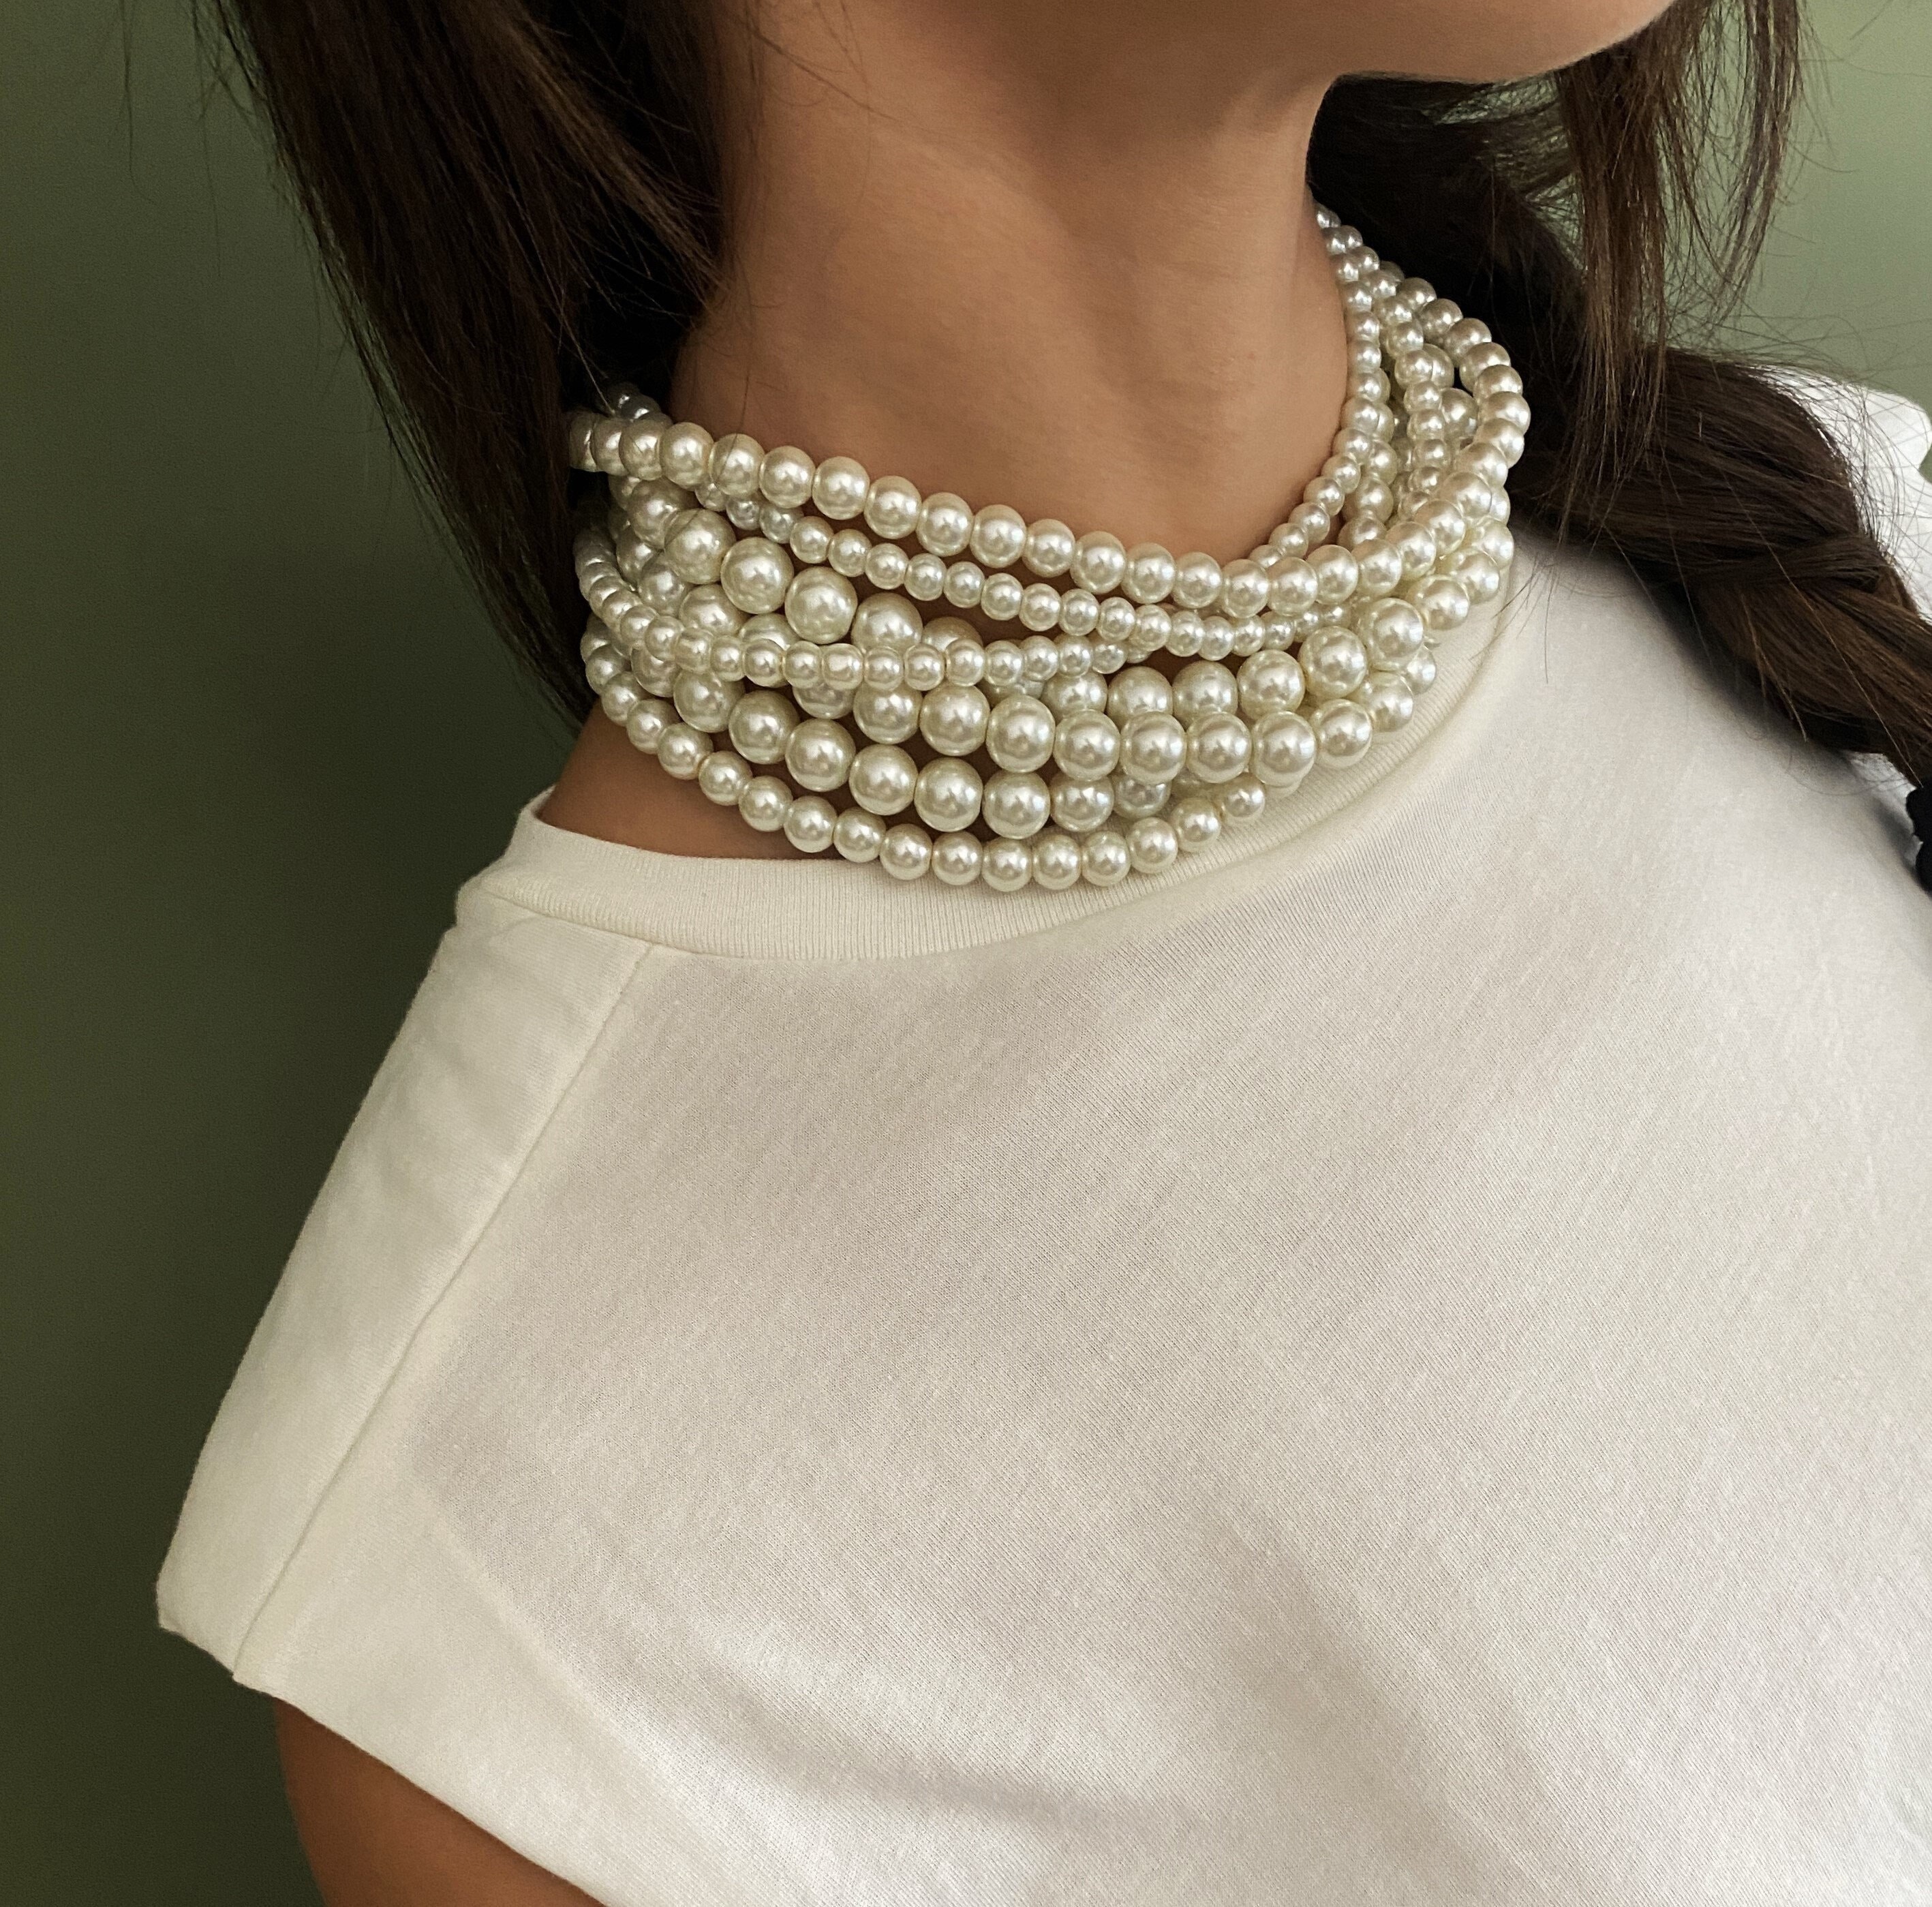 Extravagant Multi Layered Pearl Choker Necklace Luxury Chunky 